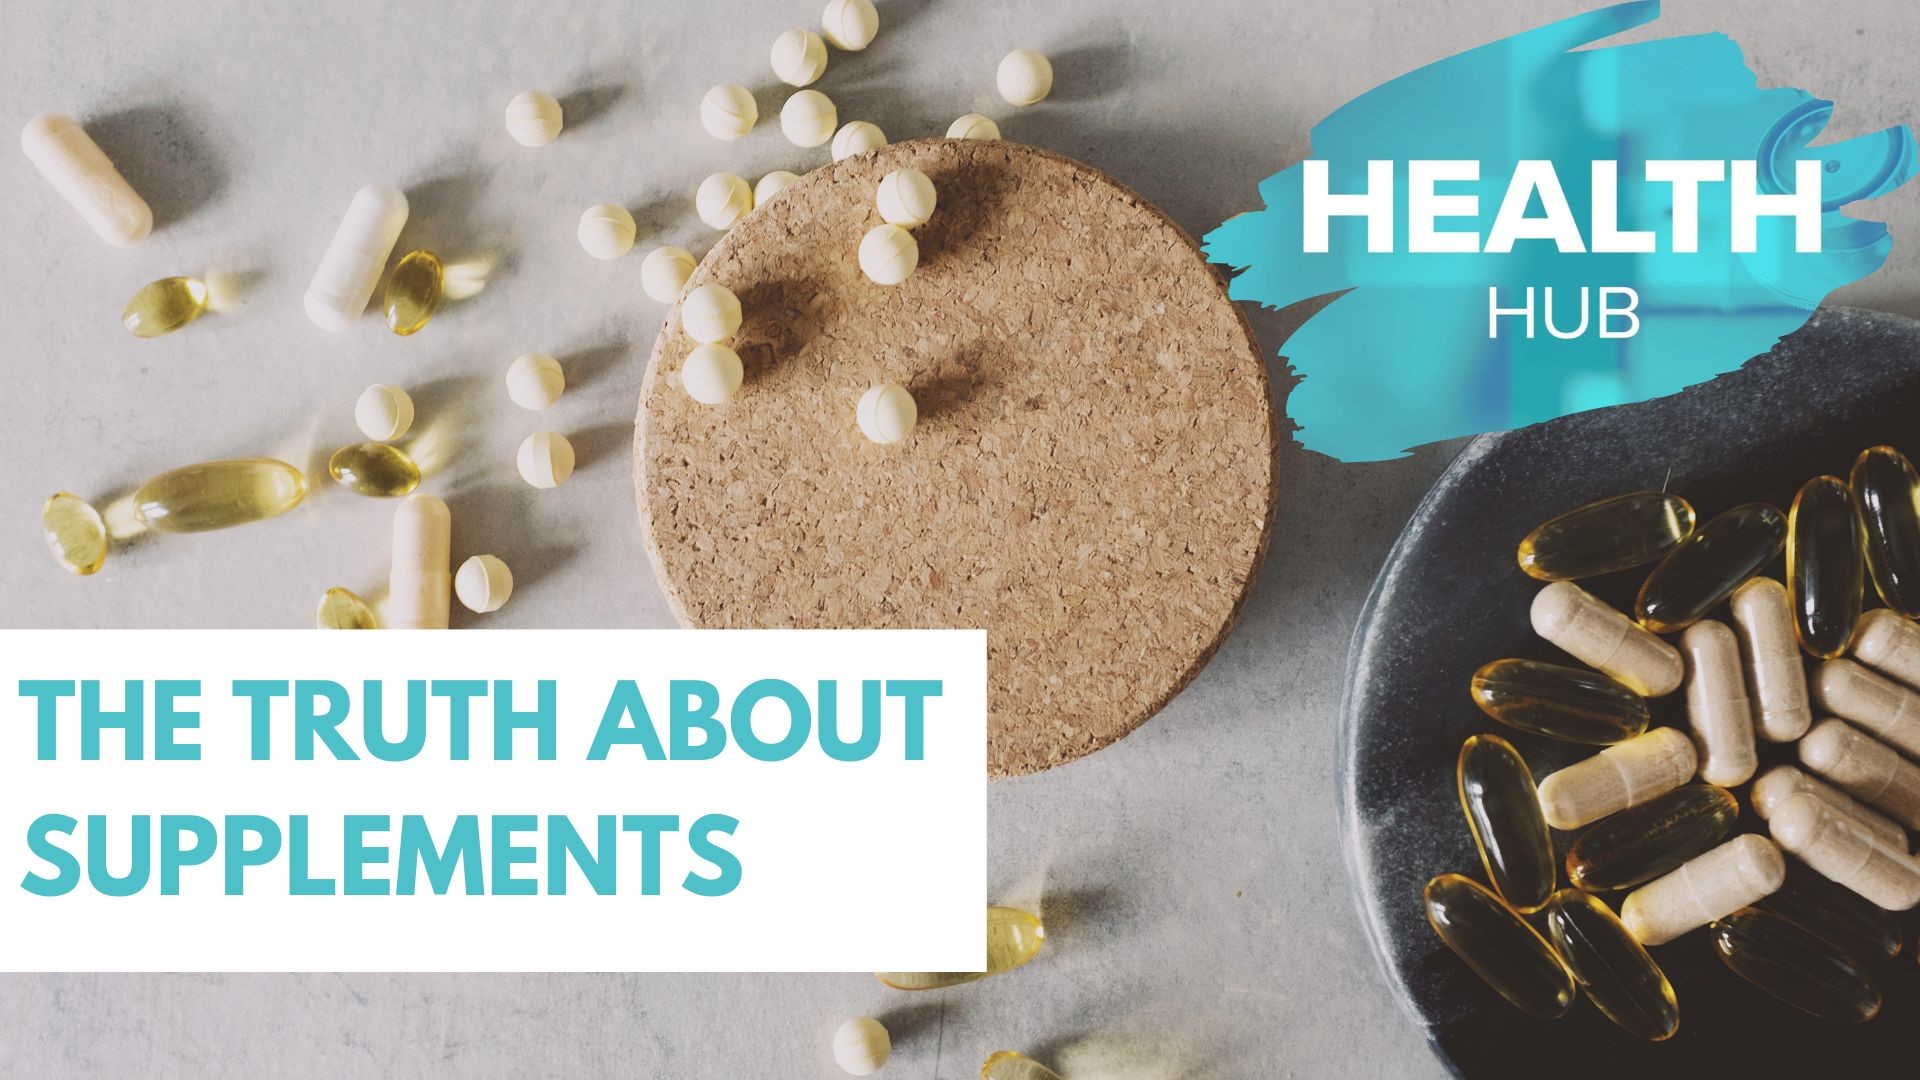 Diving into what doctors and experts say about supplements, from collagen to apple cider vinegar and fish oil. What you need to know before taking extra supplements.